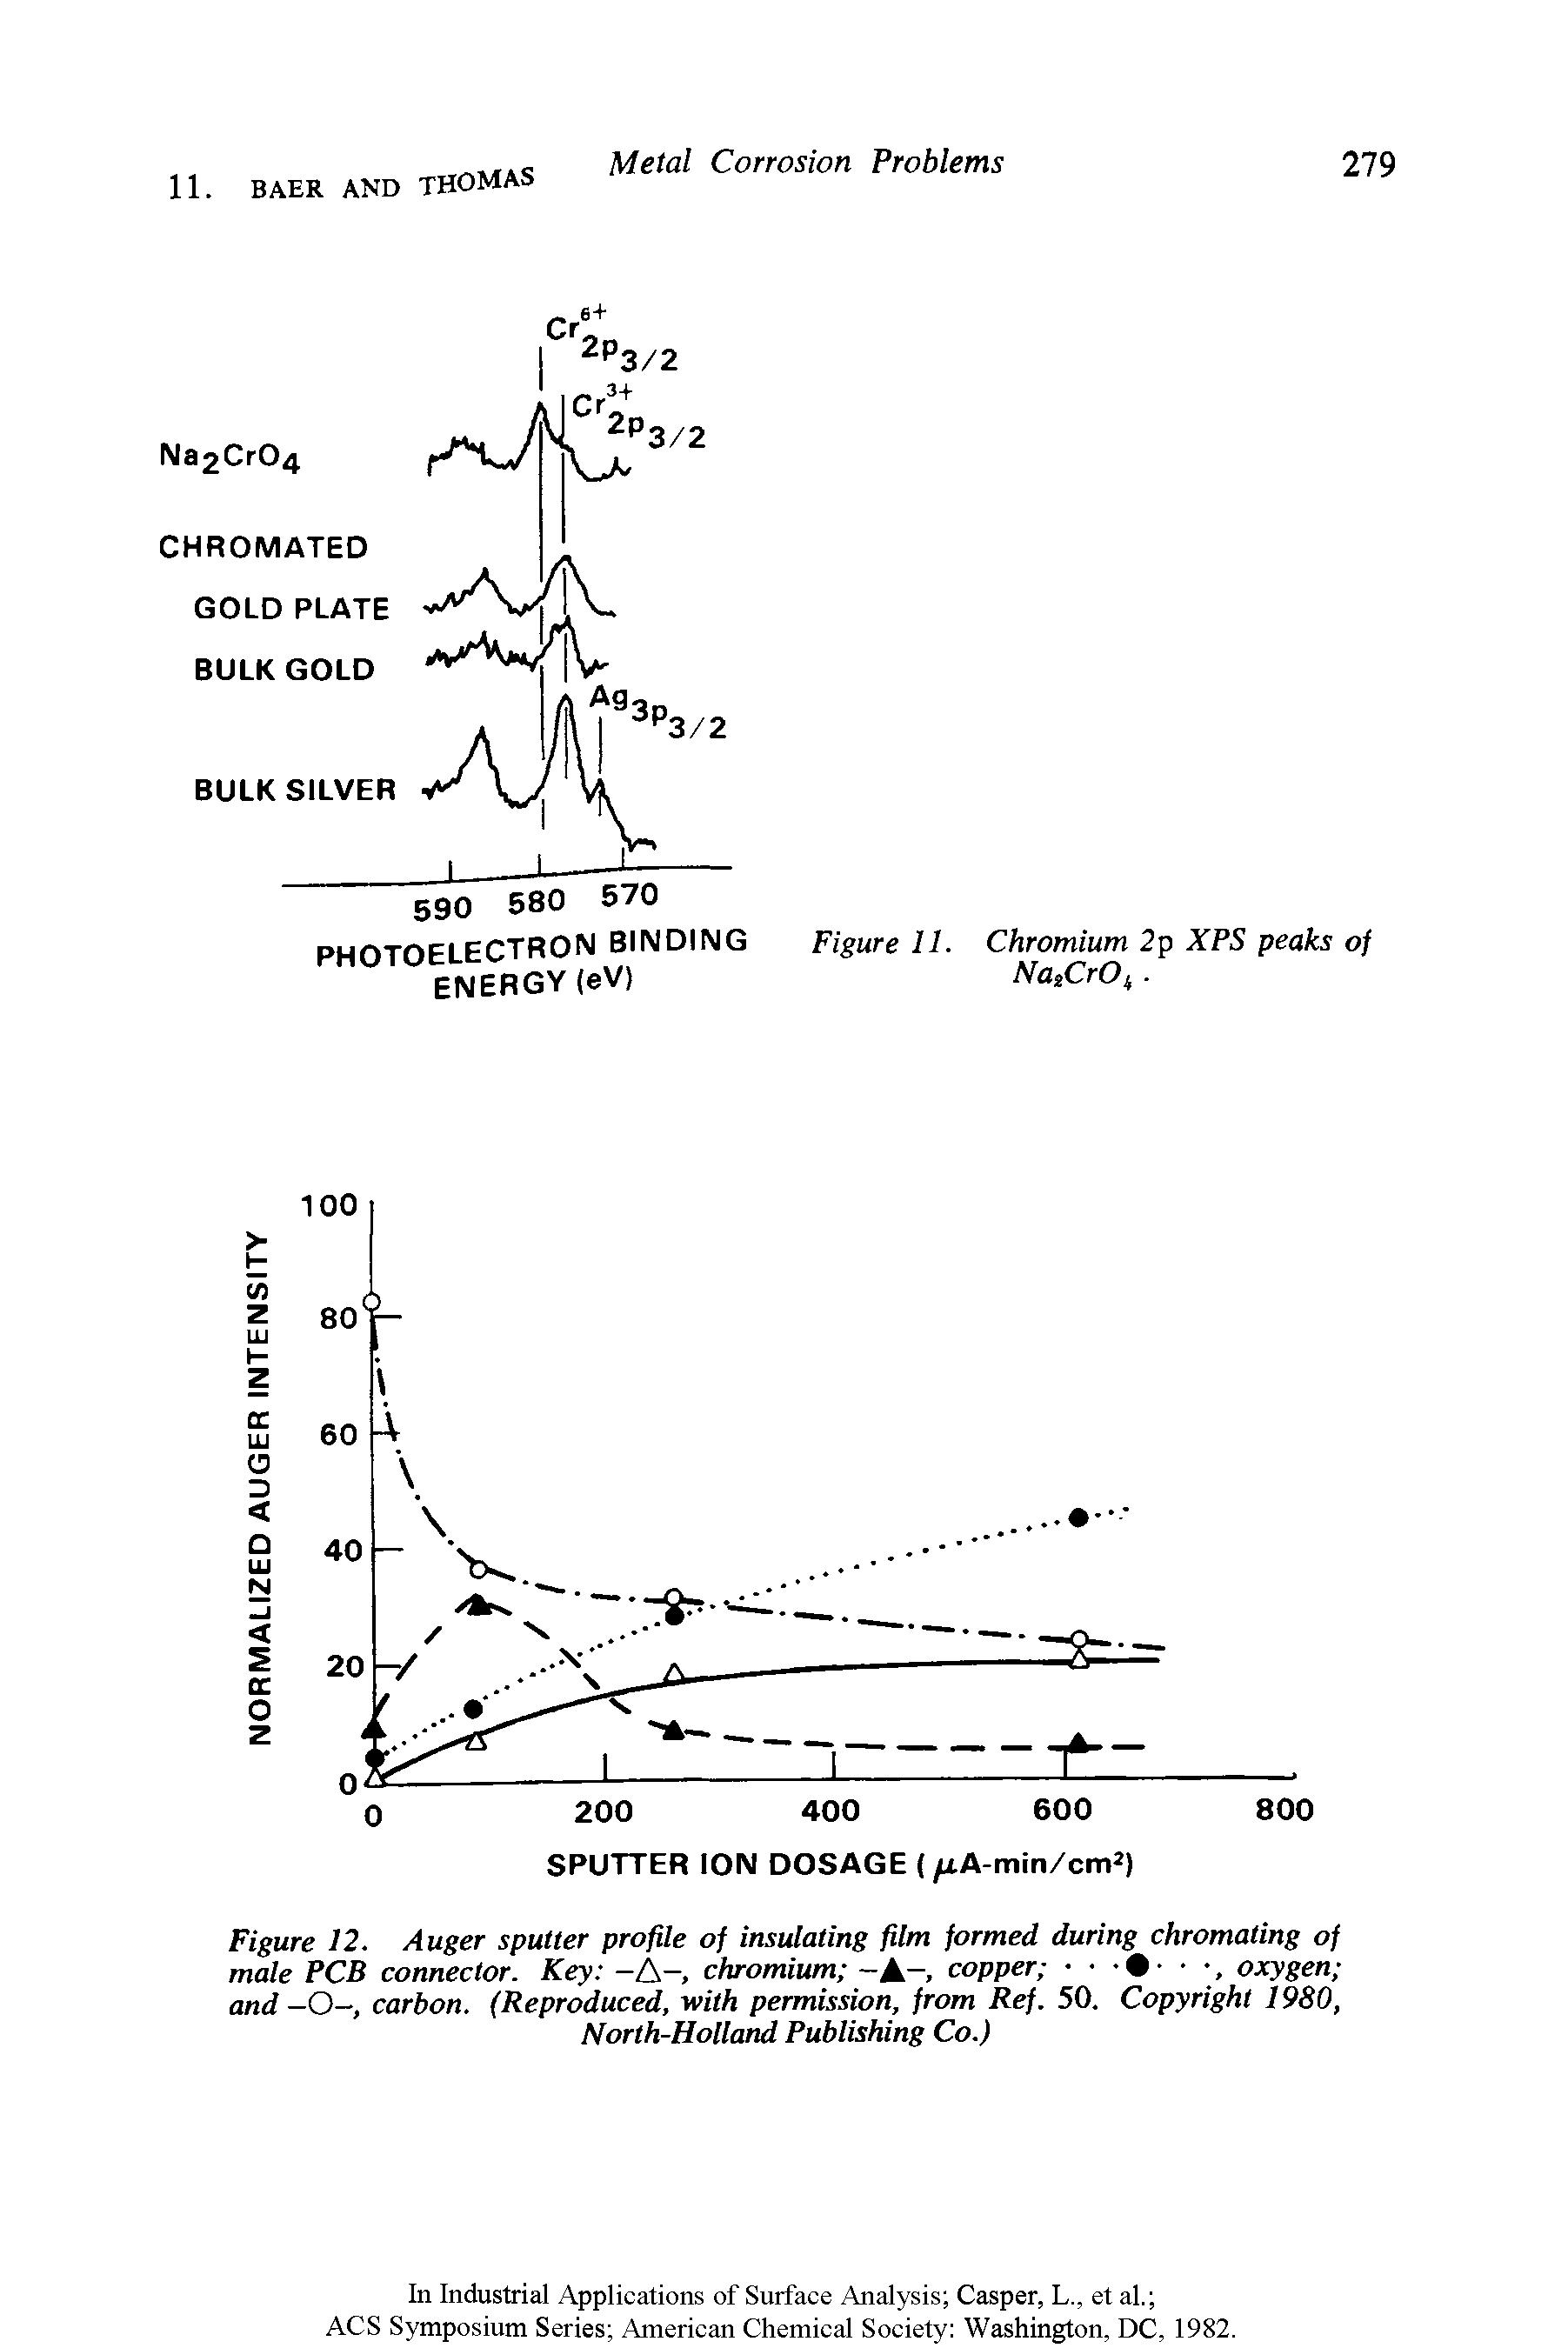 Figure 12. Auger sputter profile of insulating film formed during chromating of male PCB connector. Key -A- chromium -A-, copper , oxygen and -O-, carbon. (Reproduced, with permission, from Ref. 50. Copyright 1980, North-Holland Publishing Co.)...